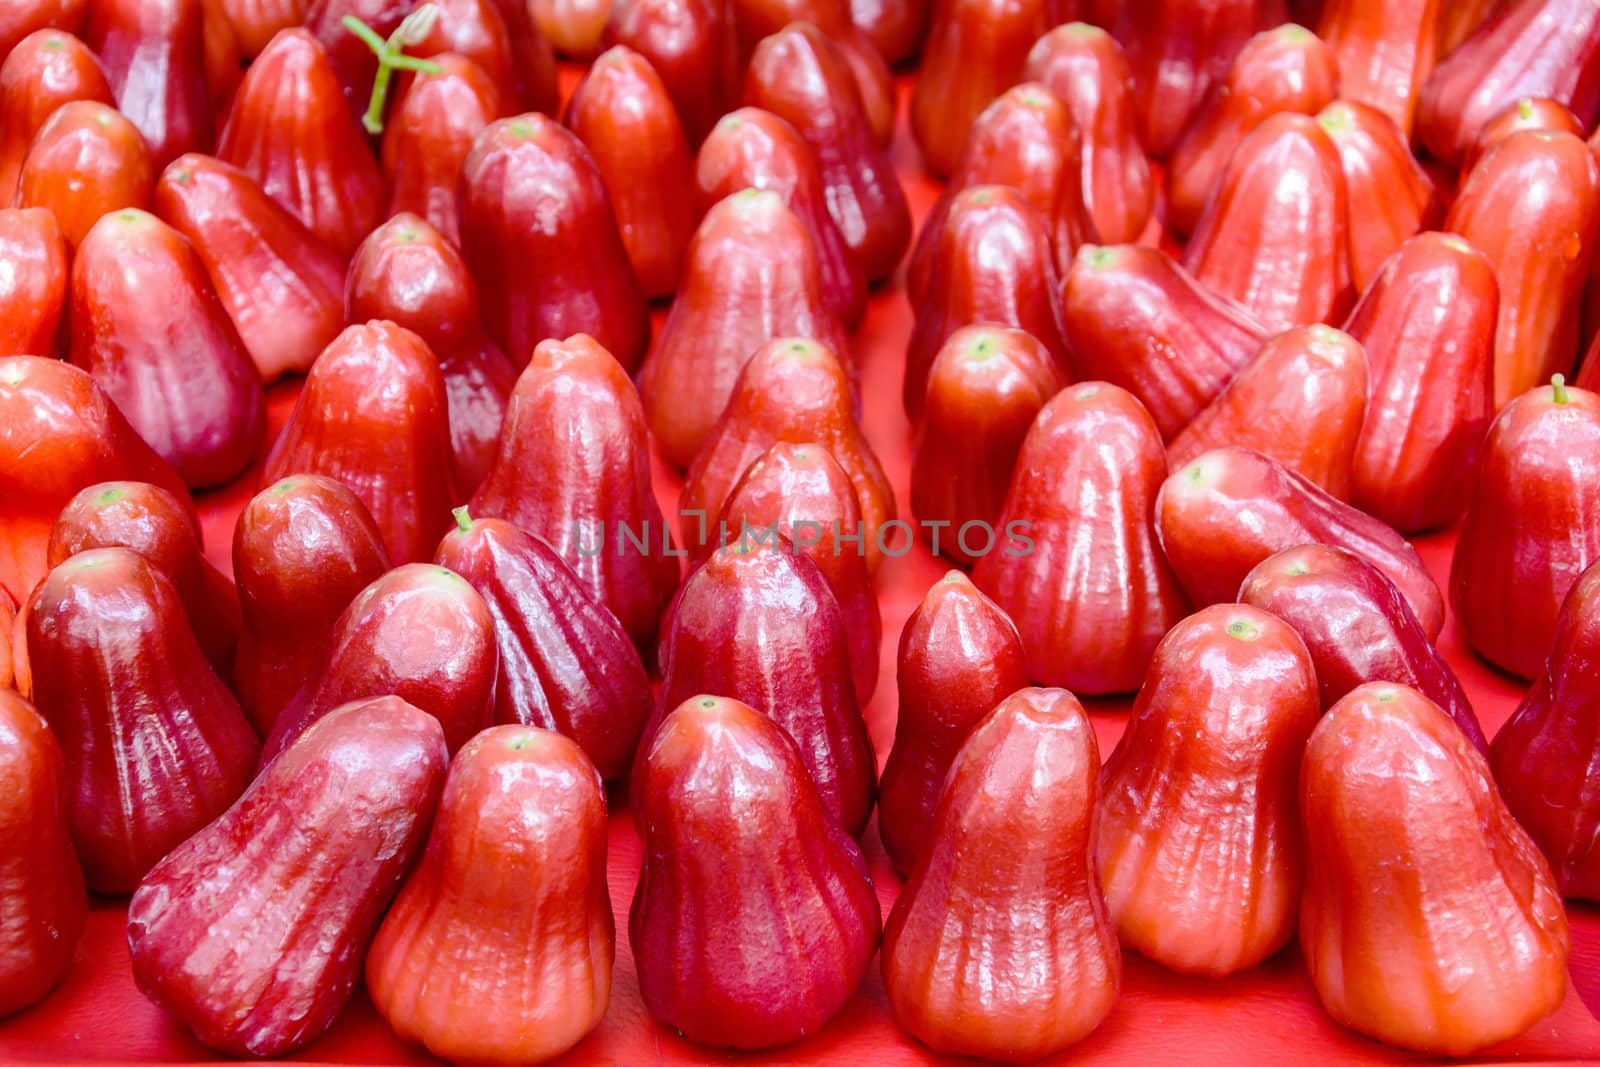 Rose apples put on the red background